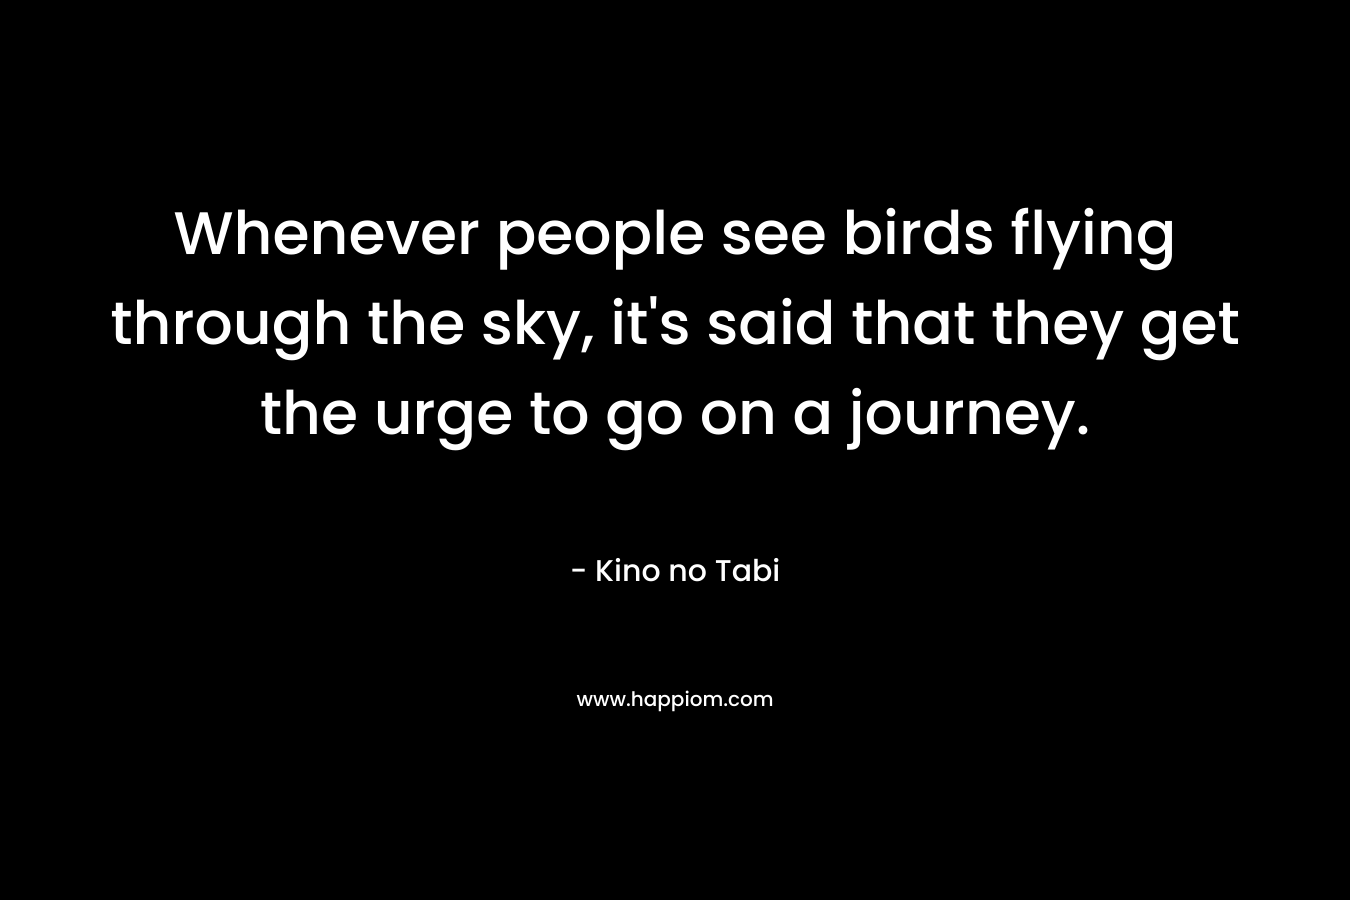 Whenever people see birds flying through the sky, it’s said that they get the urge to go on a journey. – Kino no Tabi